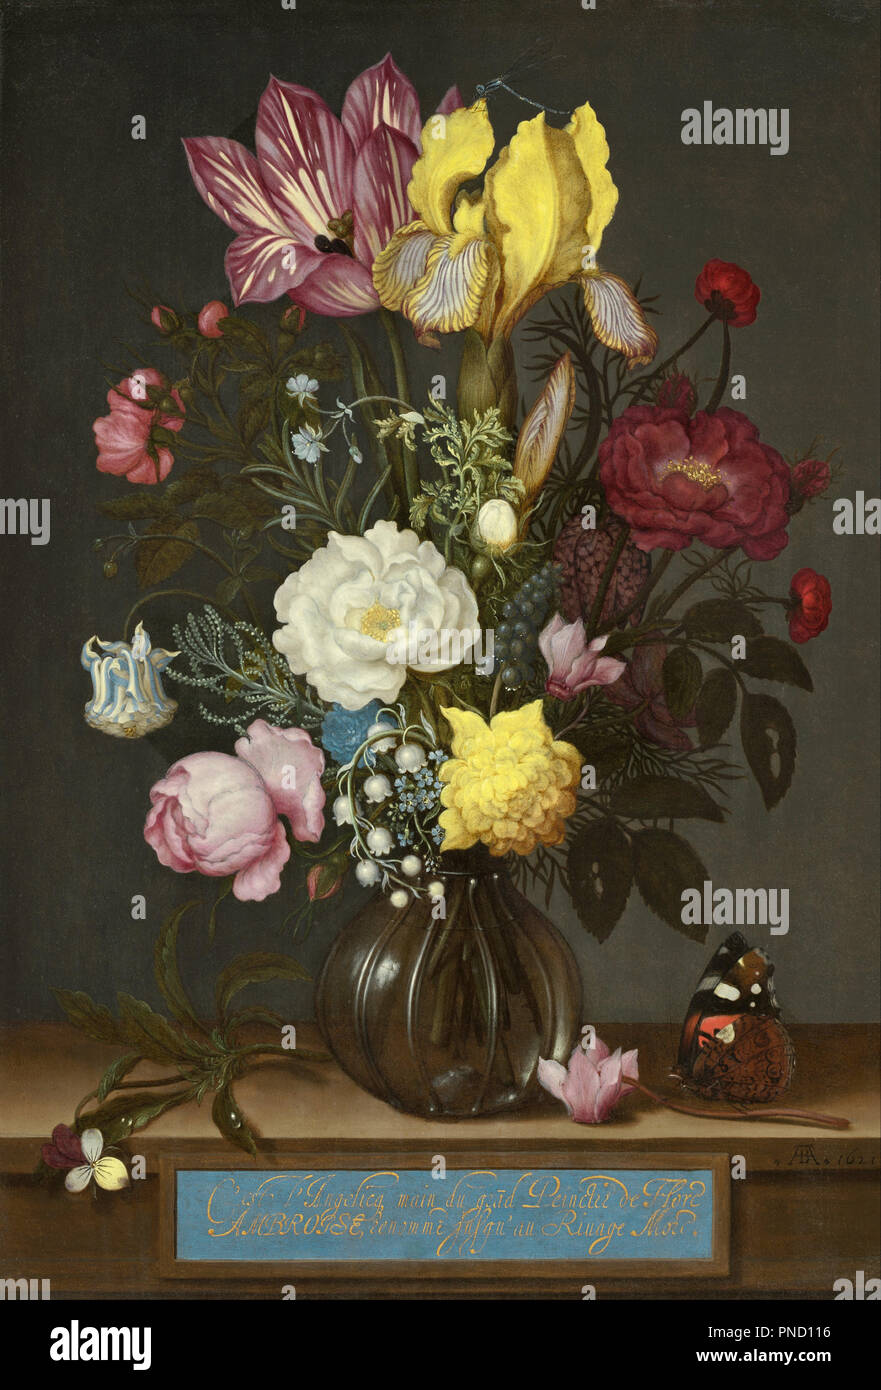 Bouquet of Flowers in a Glass Vase. Date/Period: 1621. Painting. Oil on copper. Height: 316 mm (12.44 in); Width: 216 mm (8.50 in). Author: AMBROSIUS BOSSCHAERT. Stock Photo